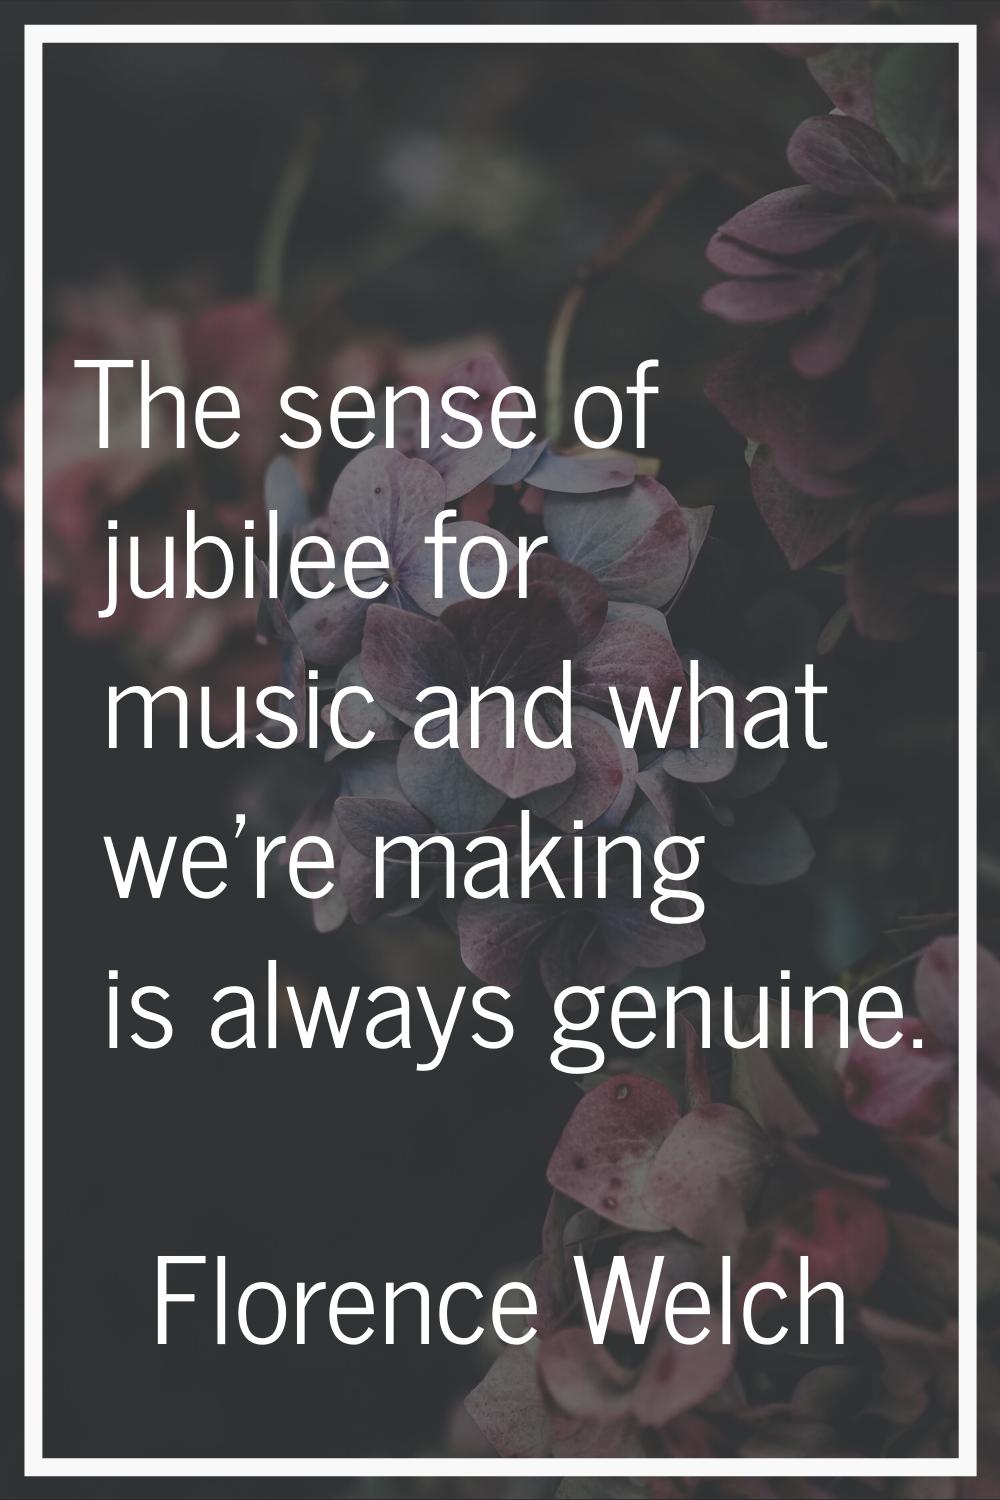 The sense of jubilee for music and what we're making is always genuine.